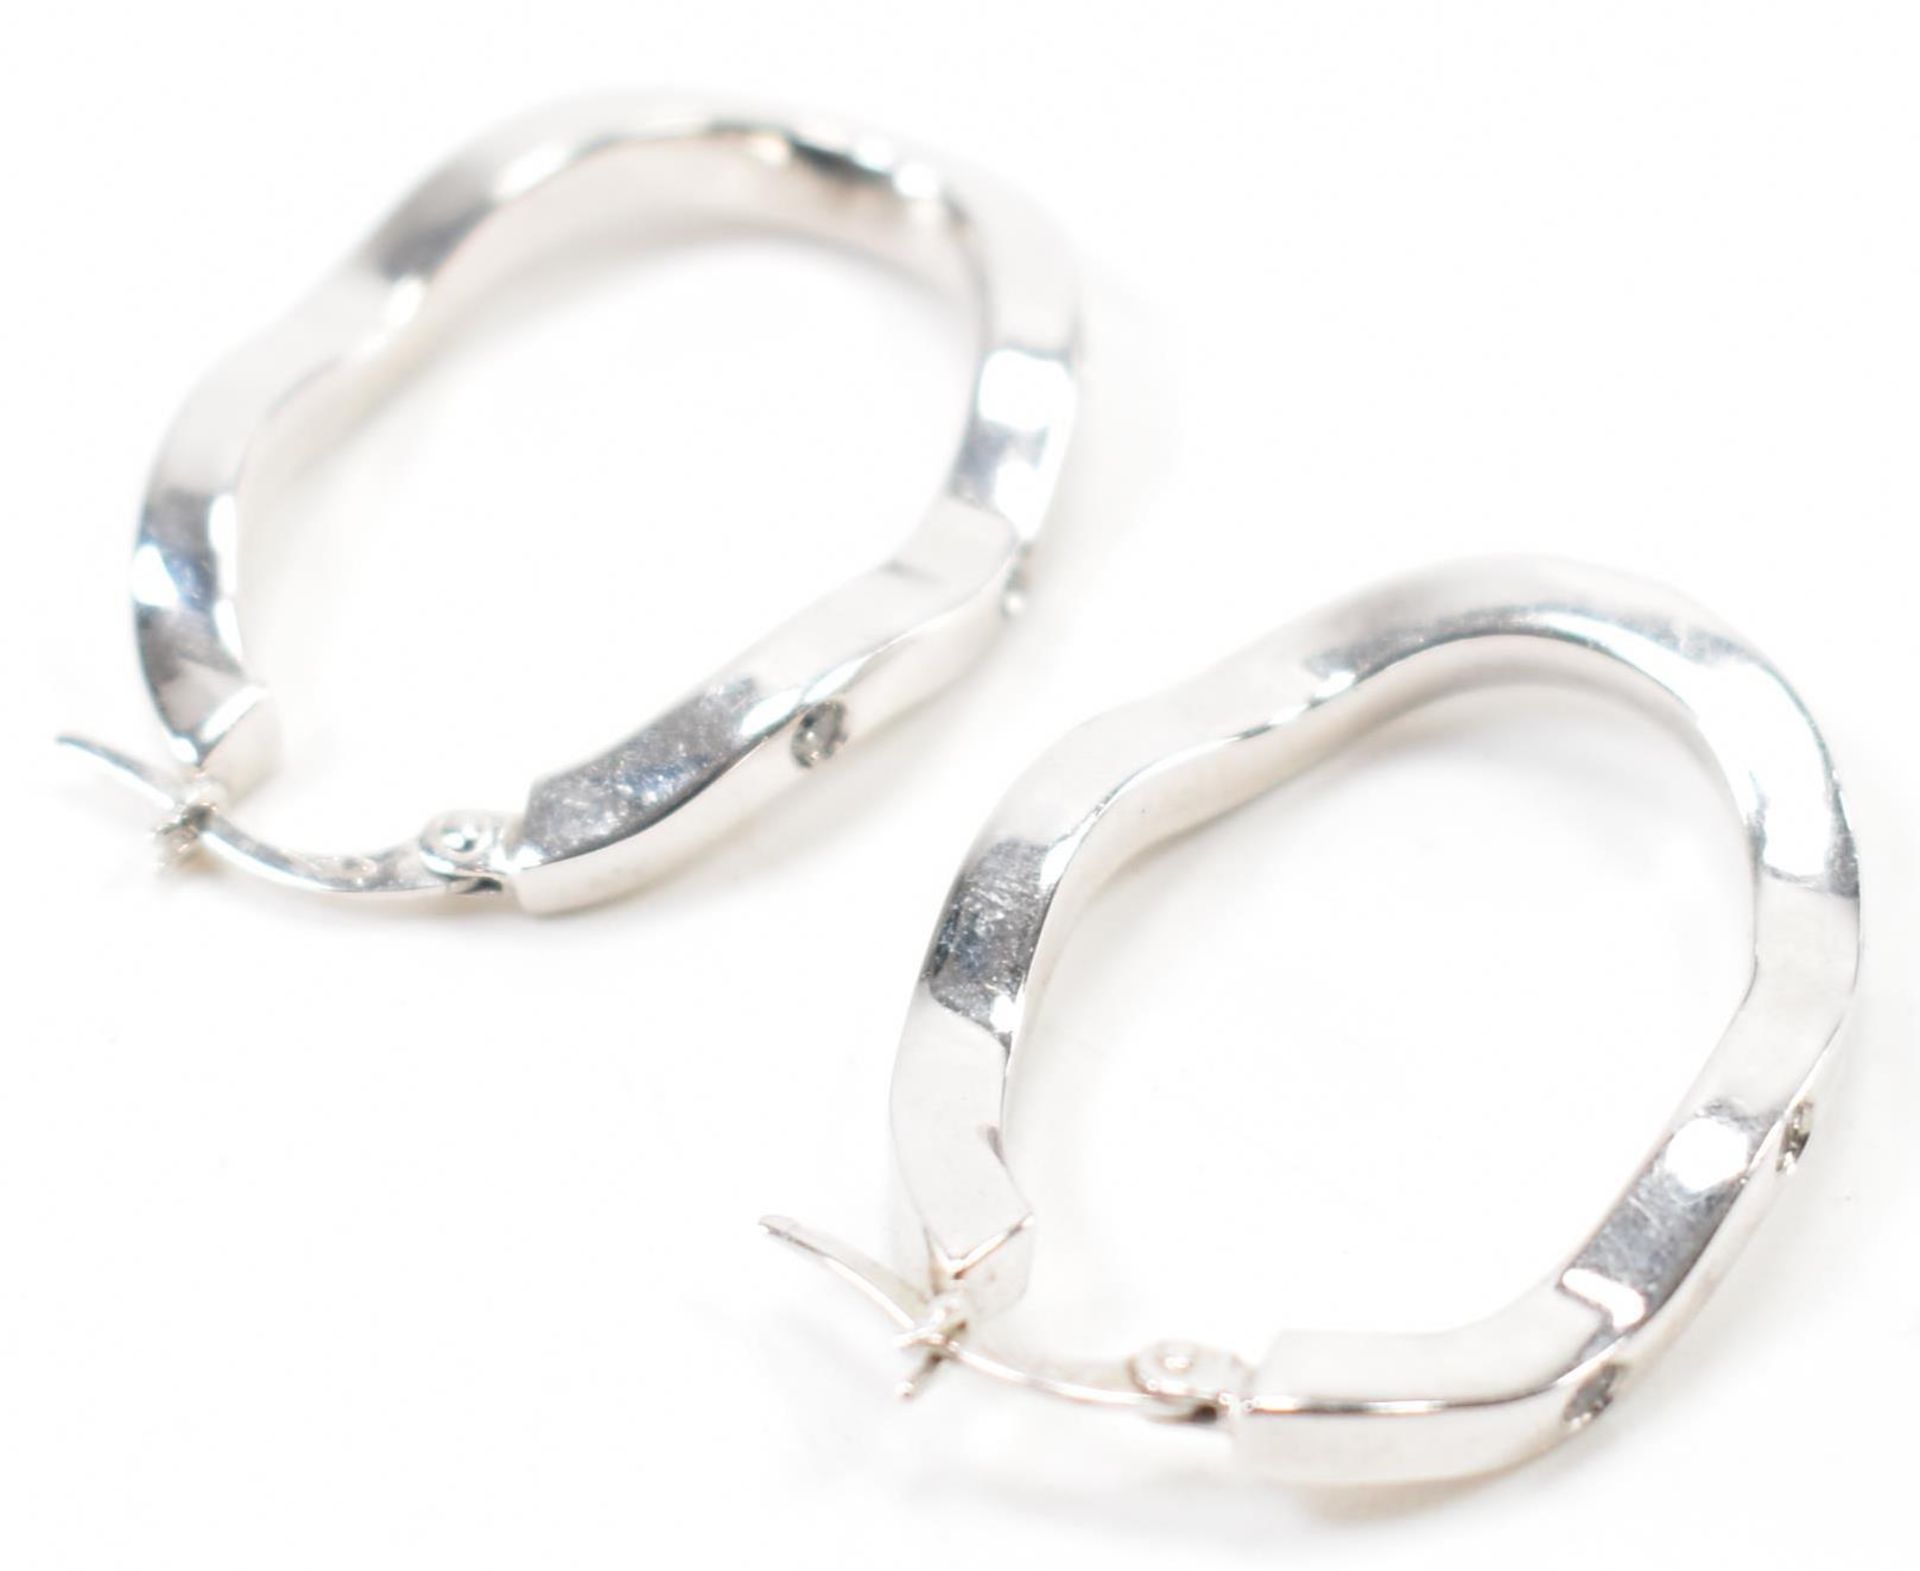 PAIR OF HALLMARKED 9CT WHITE GOLD & CZ HOOP EARRINGS - Image 2 of 4